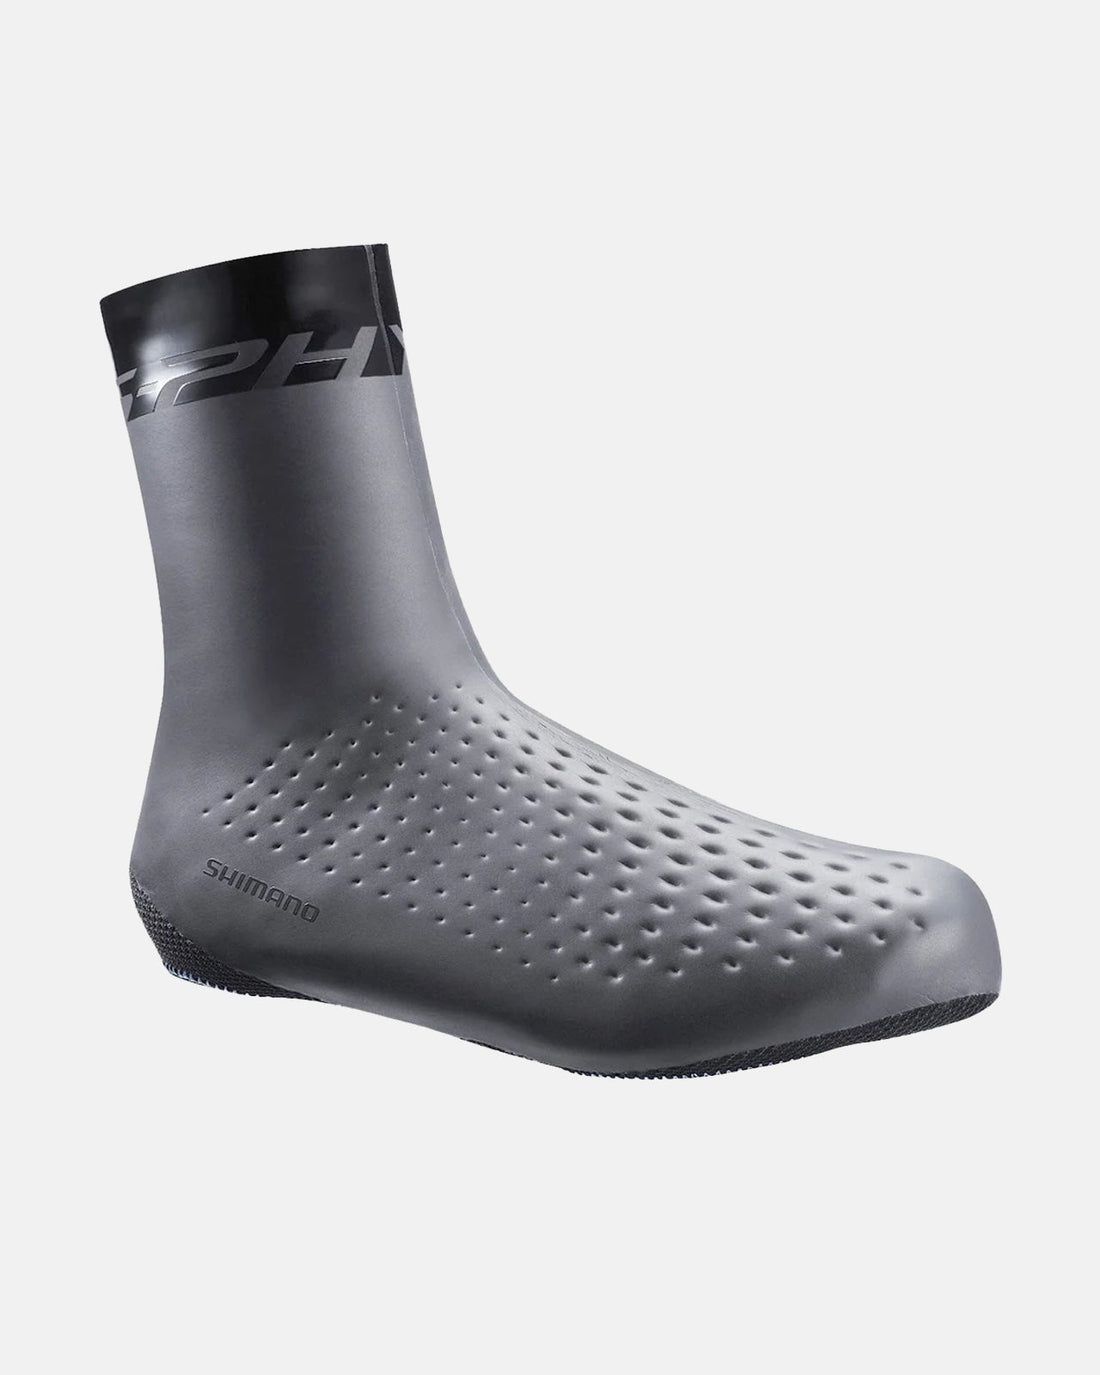 S-PHYRE Insulated Shoe Covers